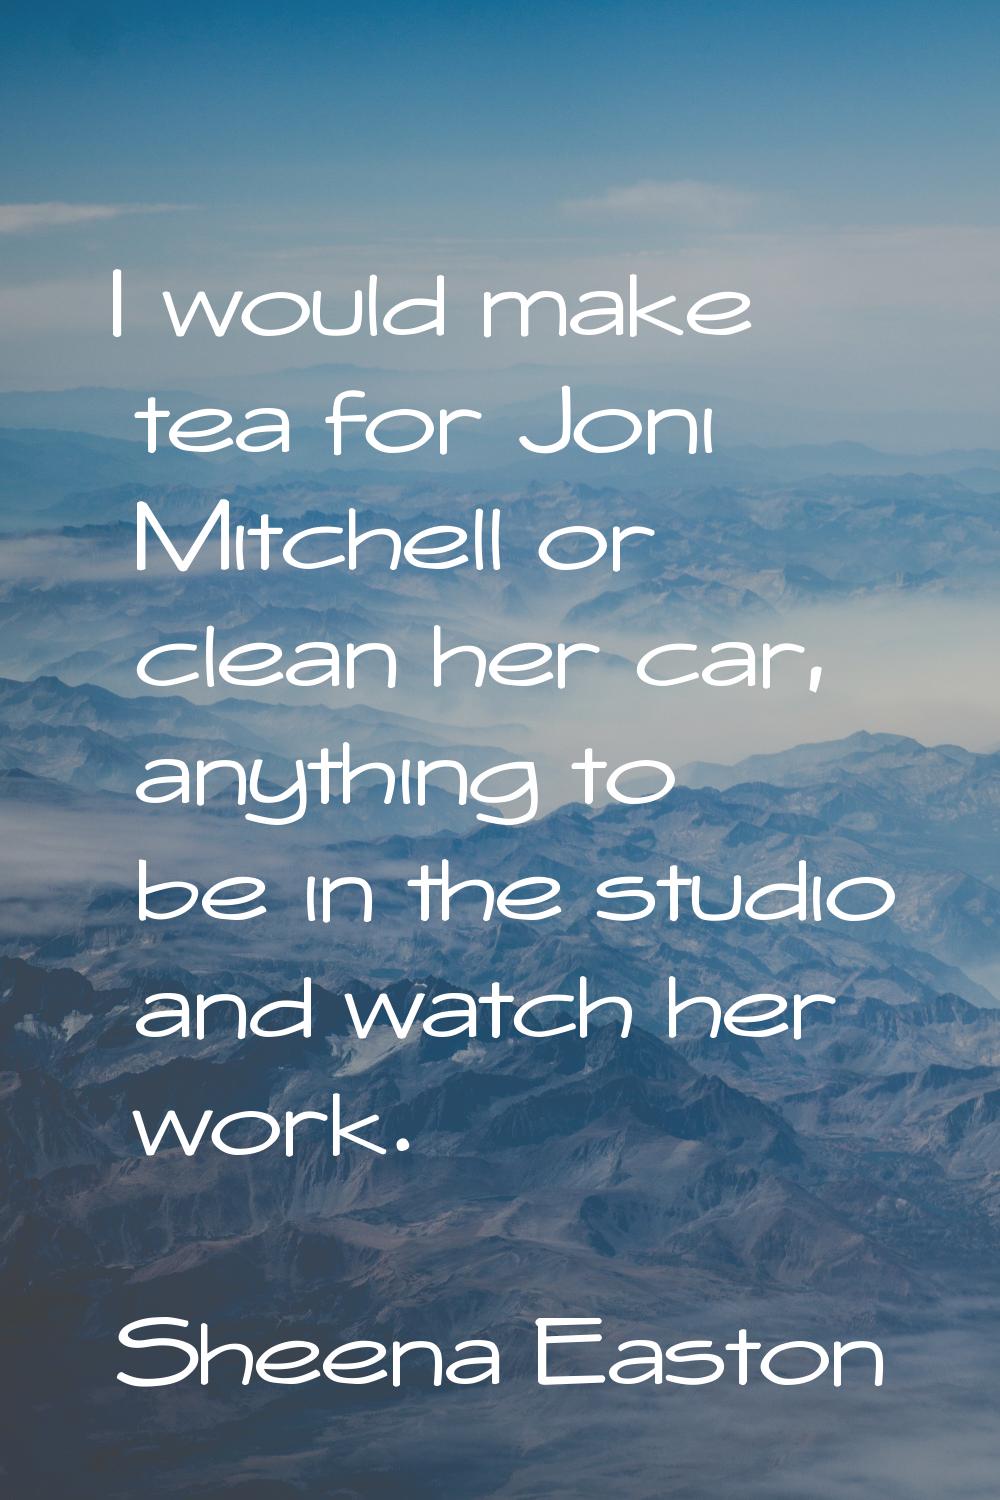 I would make tea for Joni Mitchell or clean her car, anything to be in the studio and watch her wor